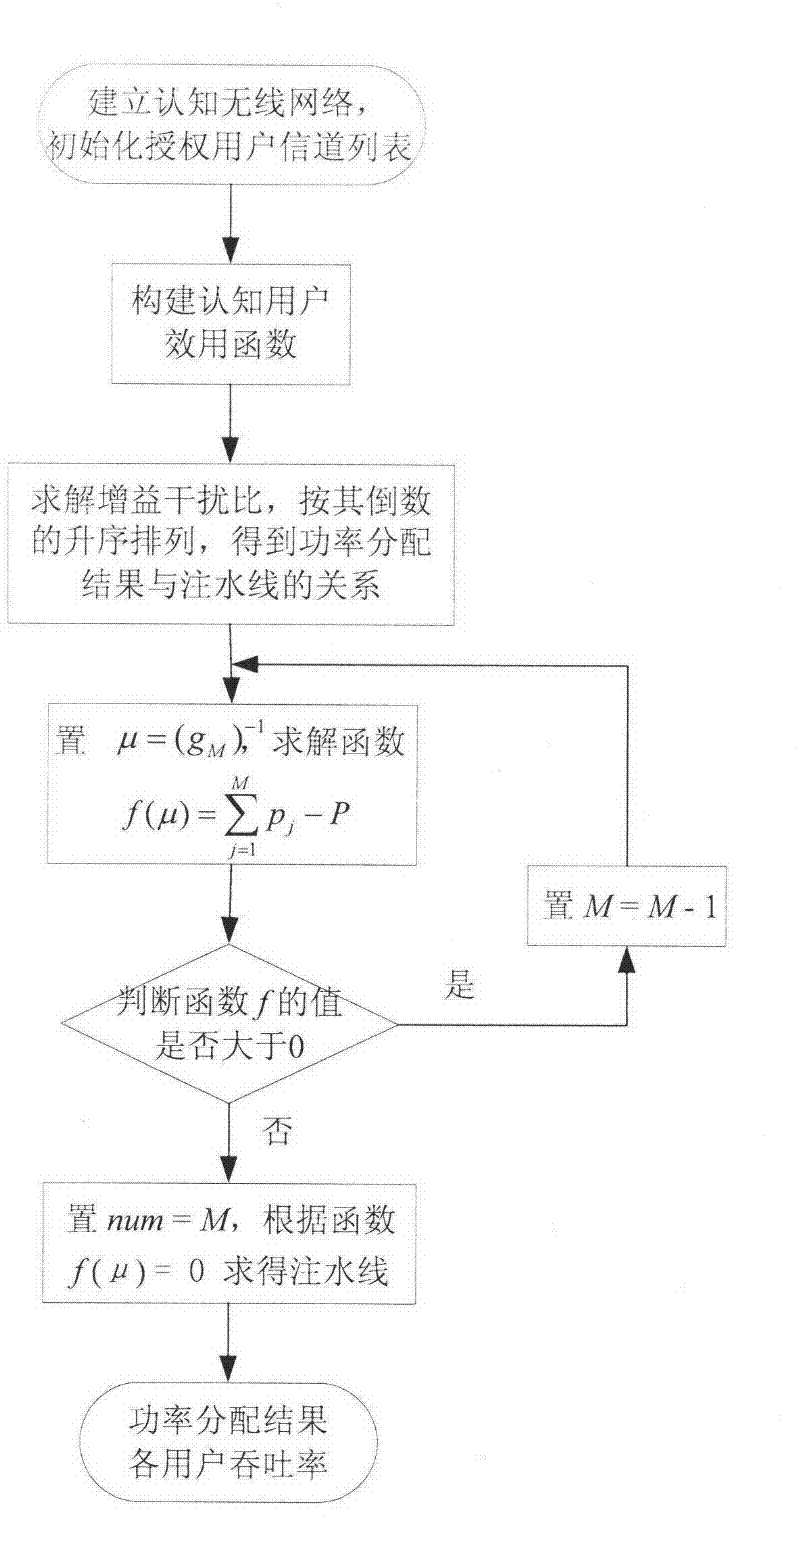 Sharing spectrum access-based carrier and power combined allocation method